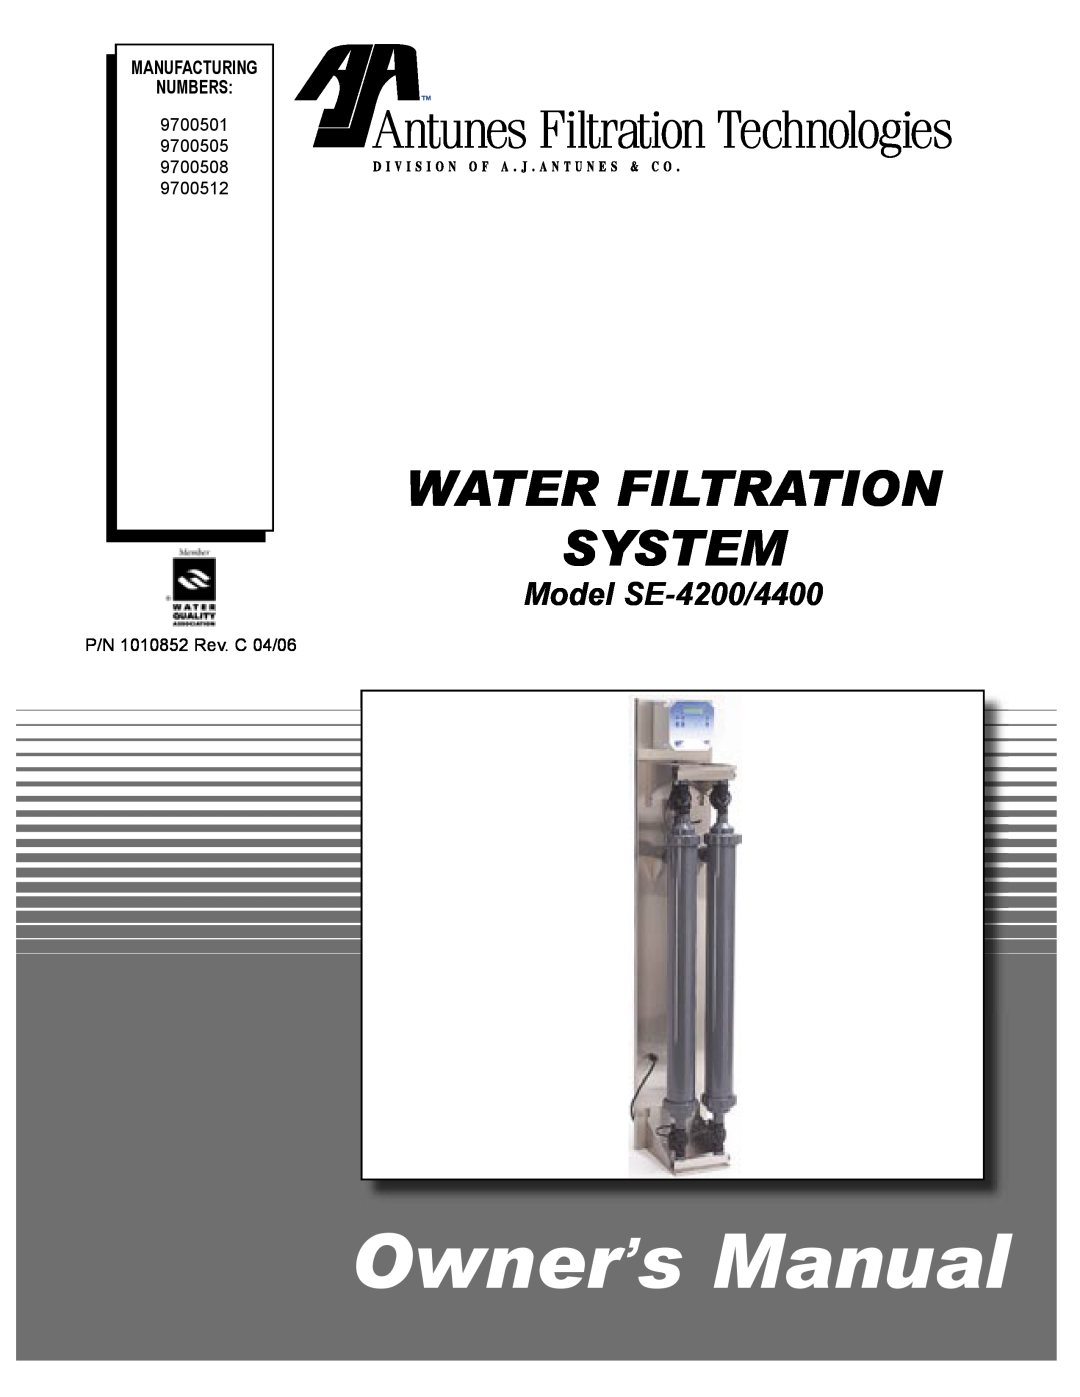 Antunes, AJ owner manual Manufacturing Numbers, Water Filtration System, Model SE-4200/4400 